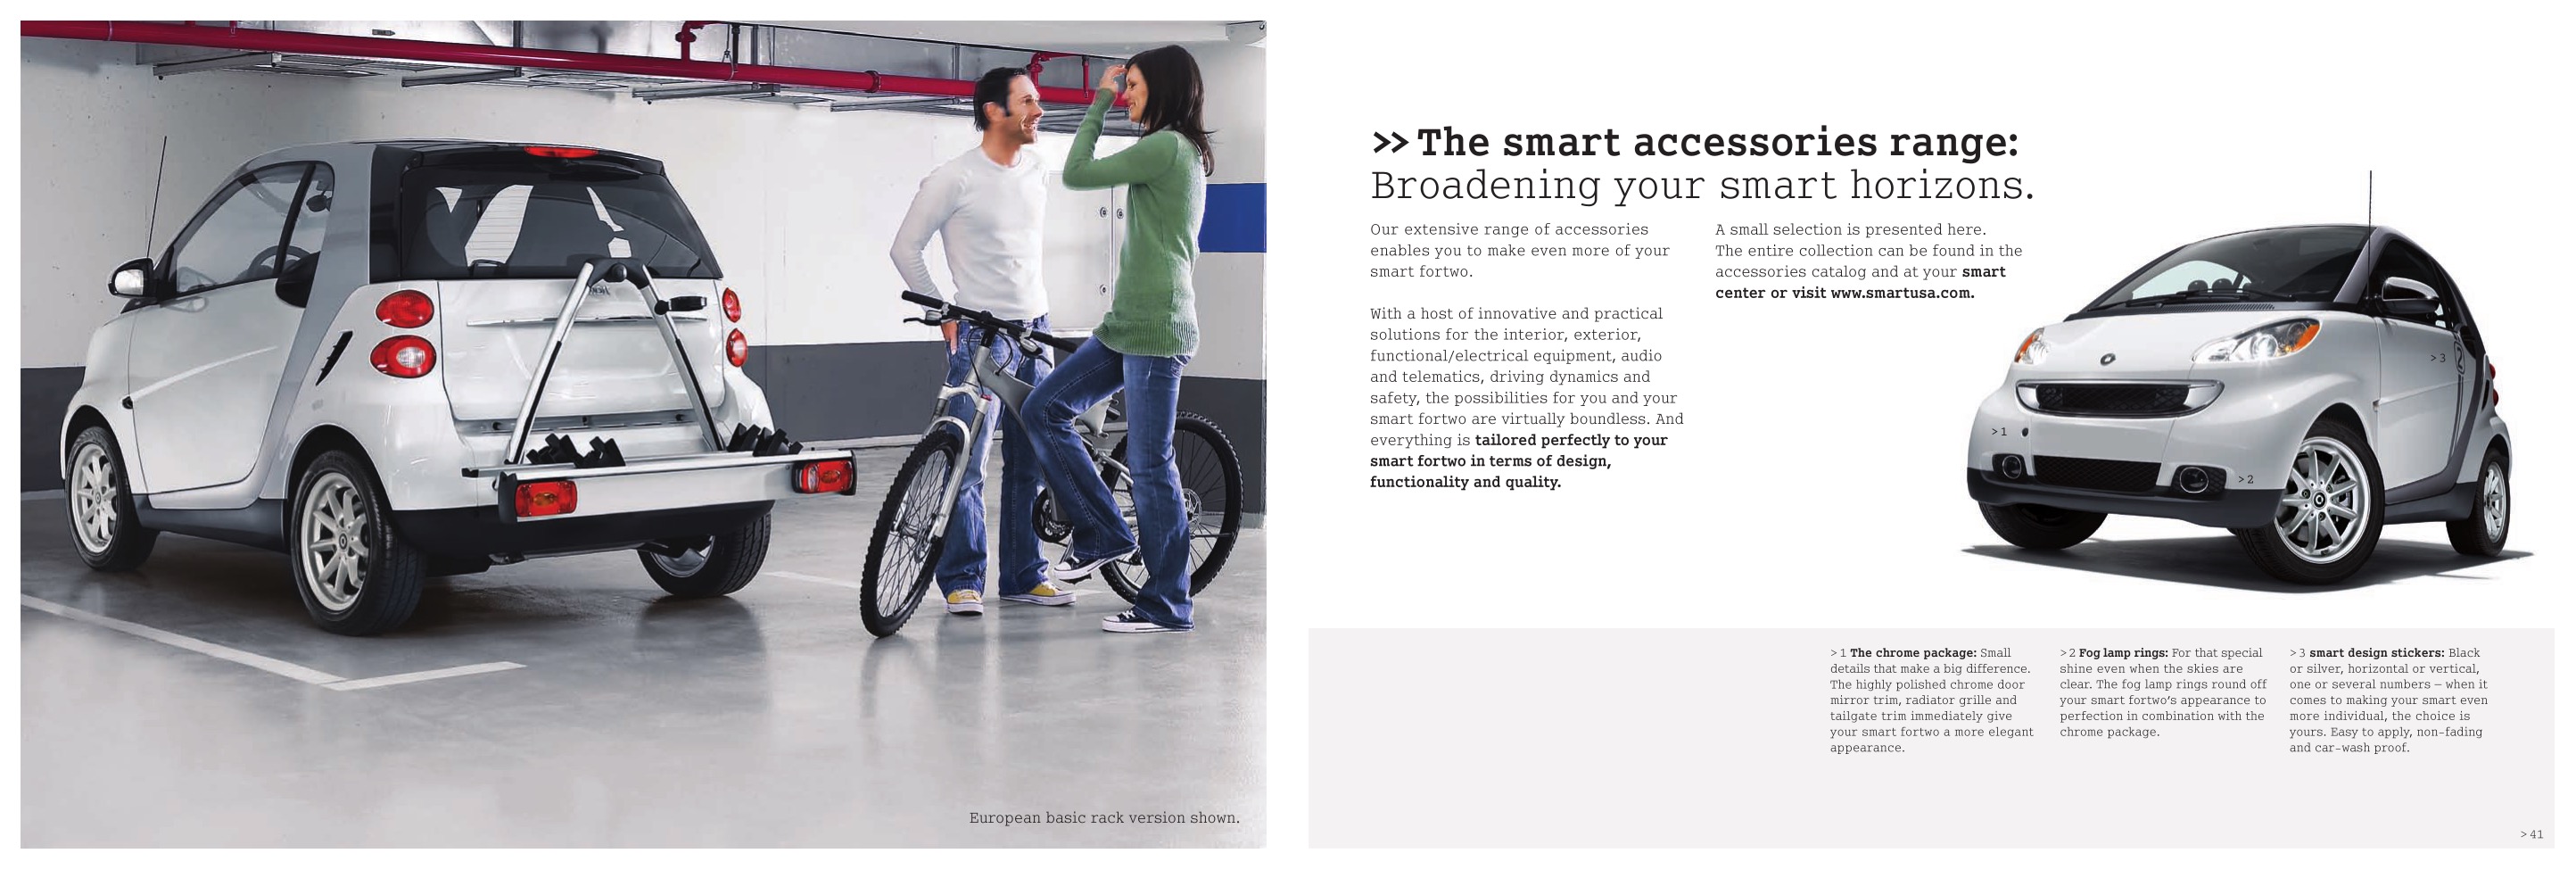 2009 Smart Fortwo Brochure Page 8